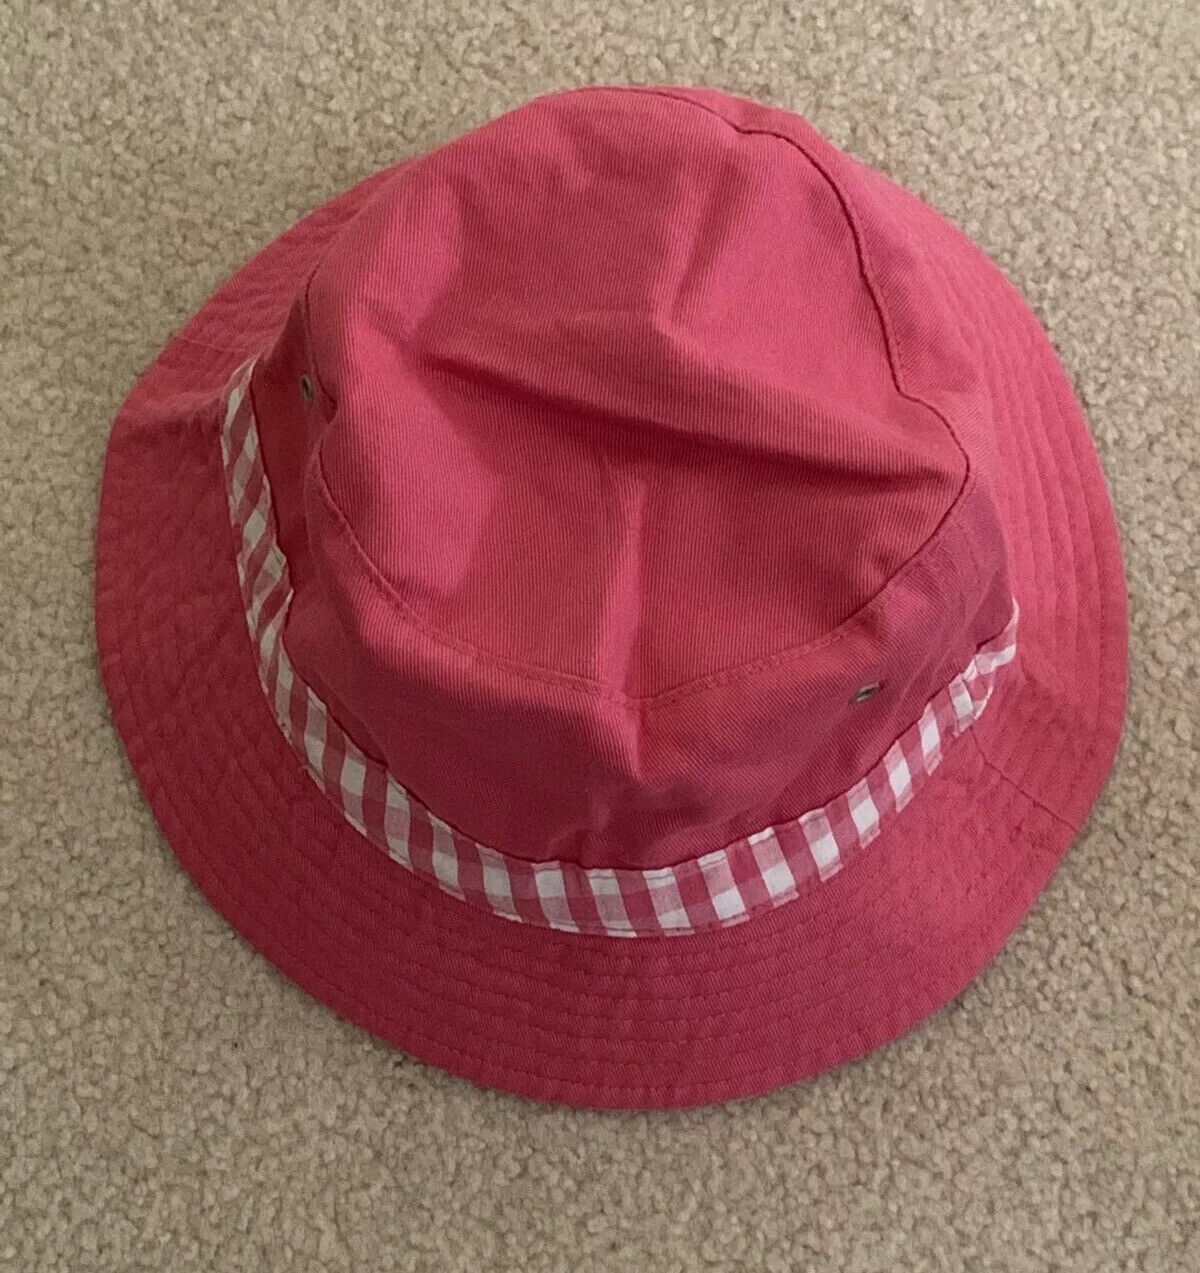 HANNA ANDERSSON Toddler Girls' Reversible Pink Gingham Sun Hat ~